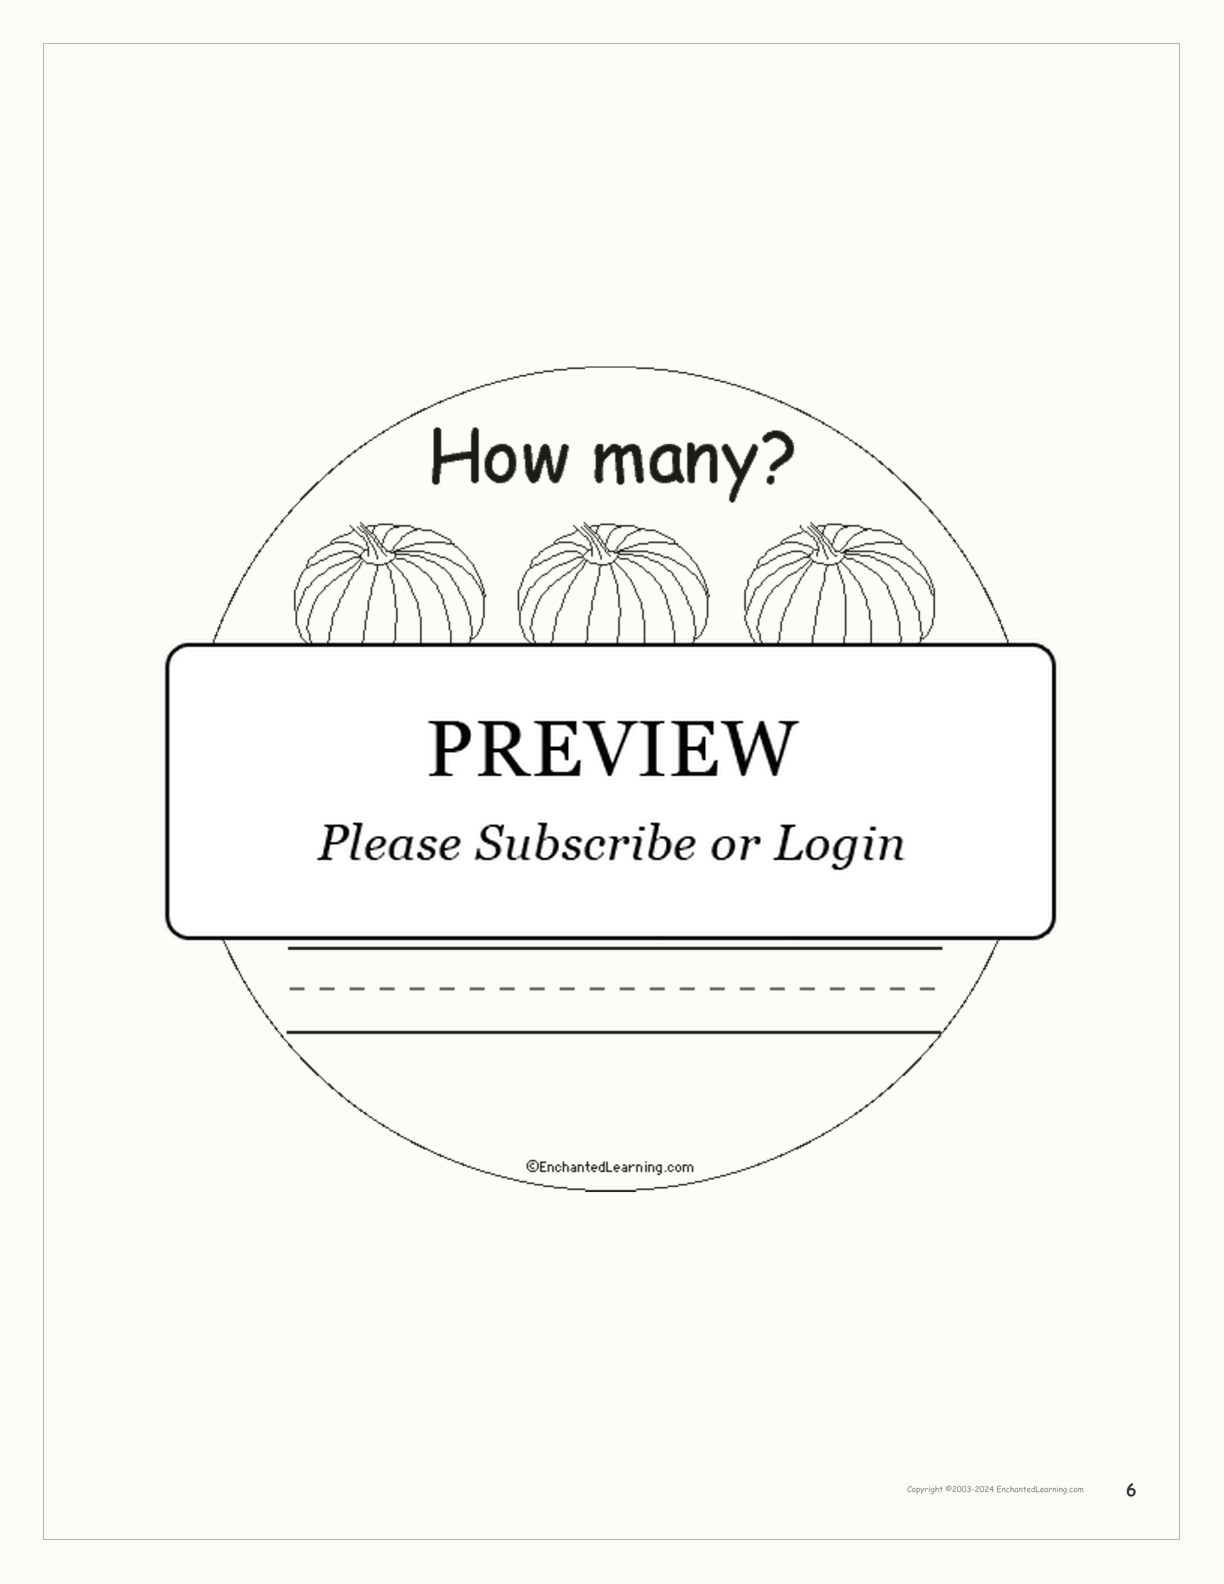 How Many Pumpkins? interactive printout page 6